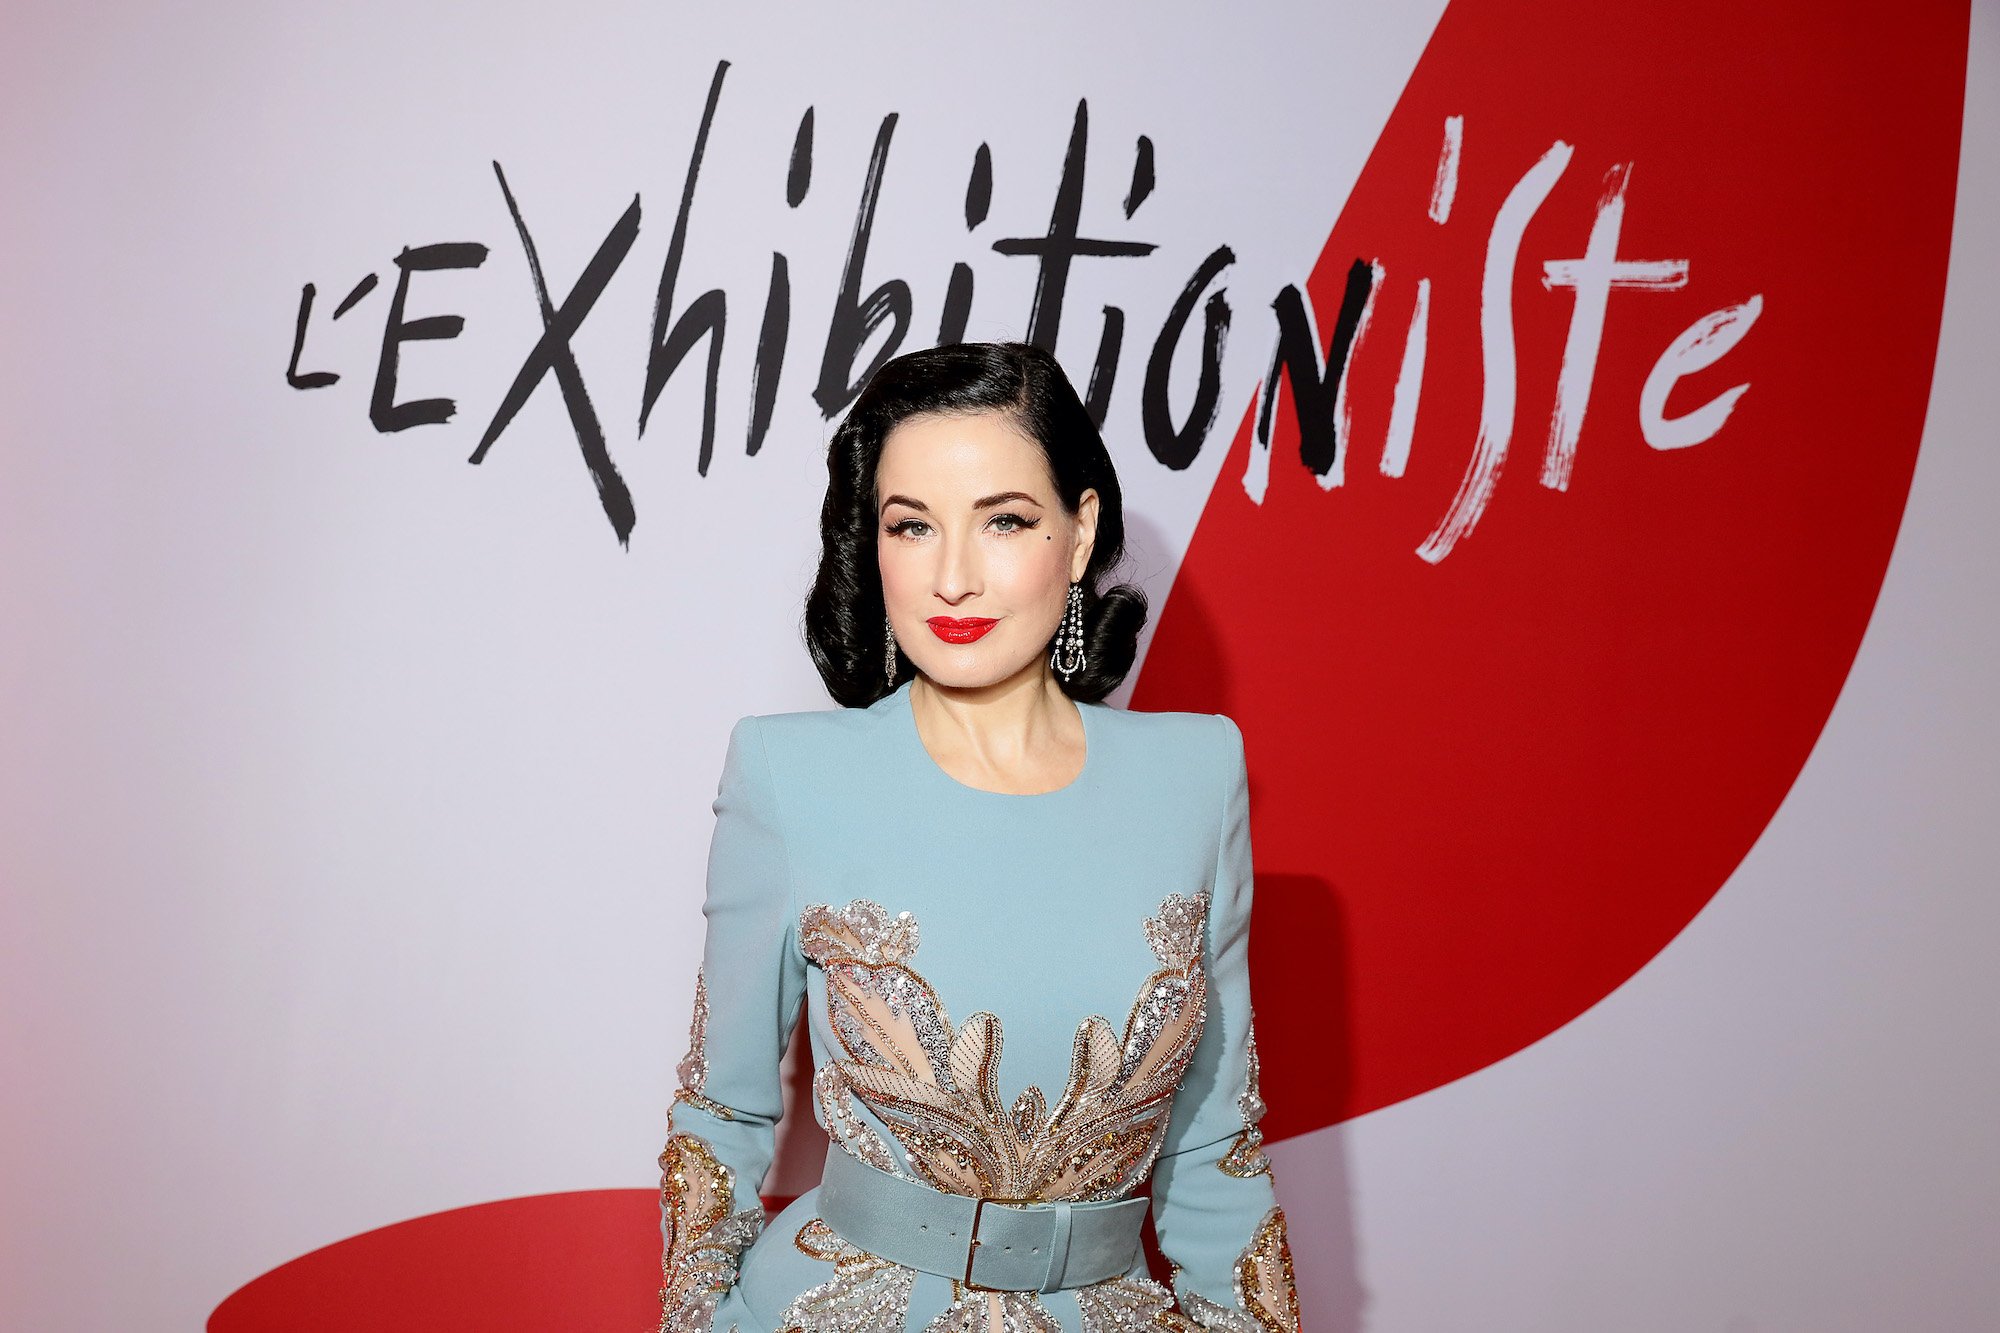 Dita Von Teese in front of a red and white background